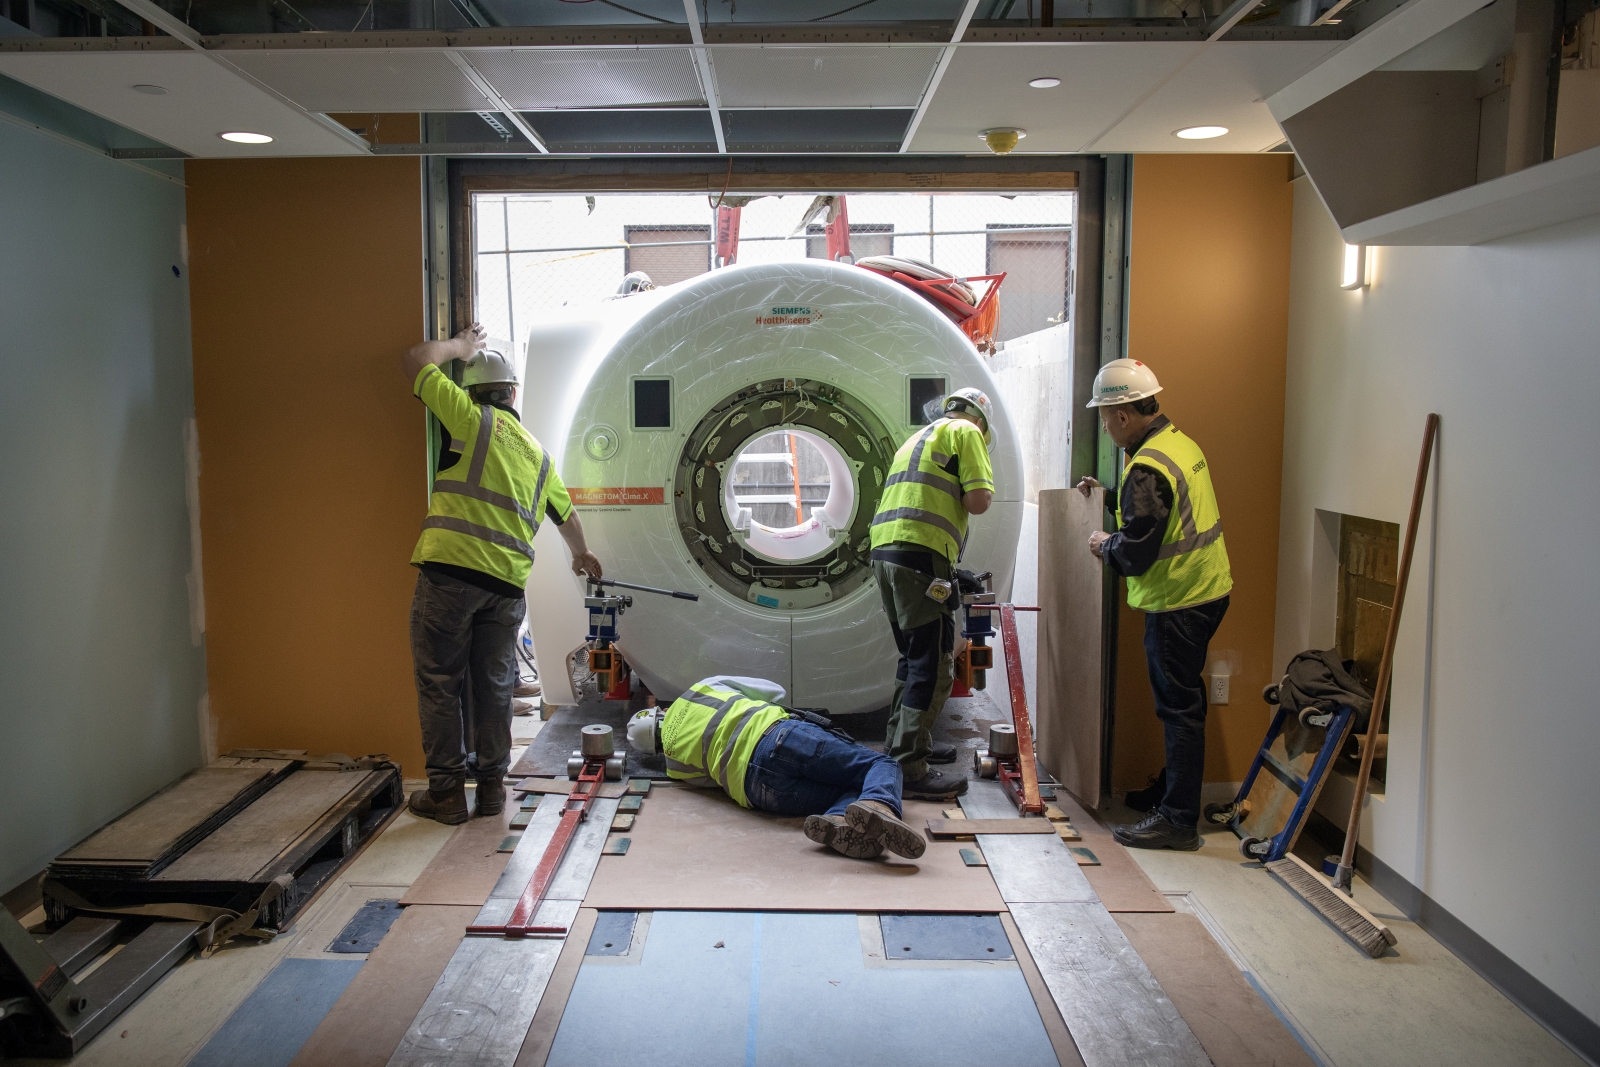 An fMRI machine being installed inside of a building, with four people in yellow construction vests working on the install.